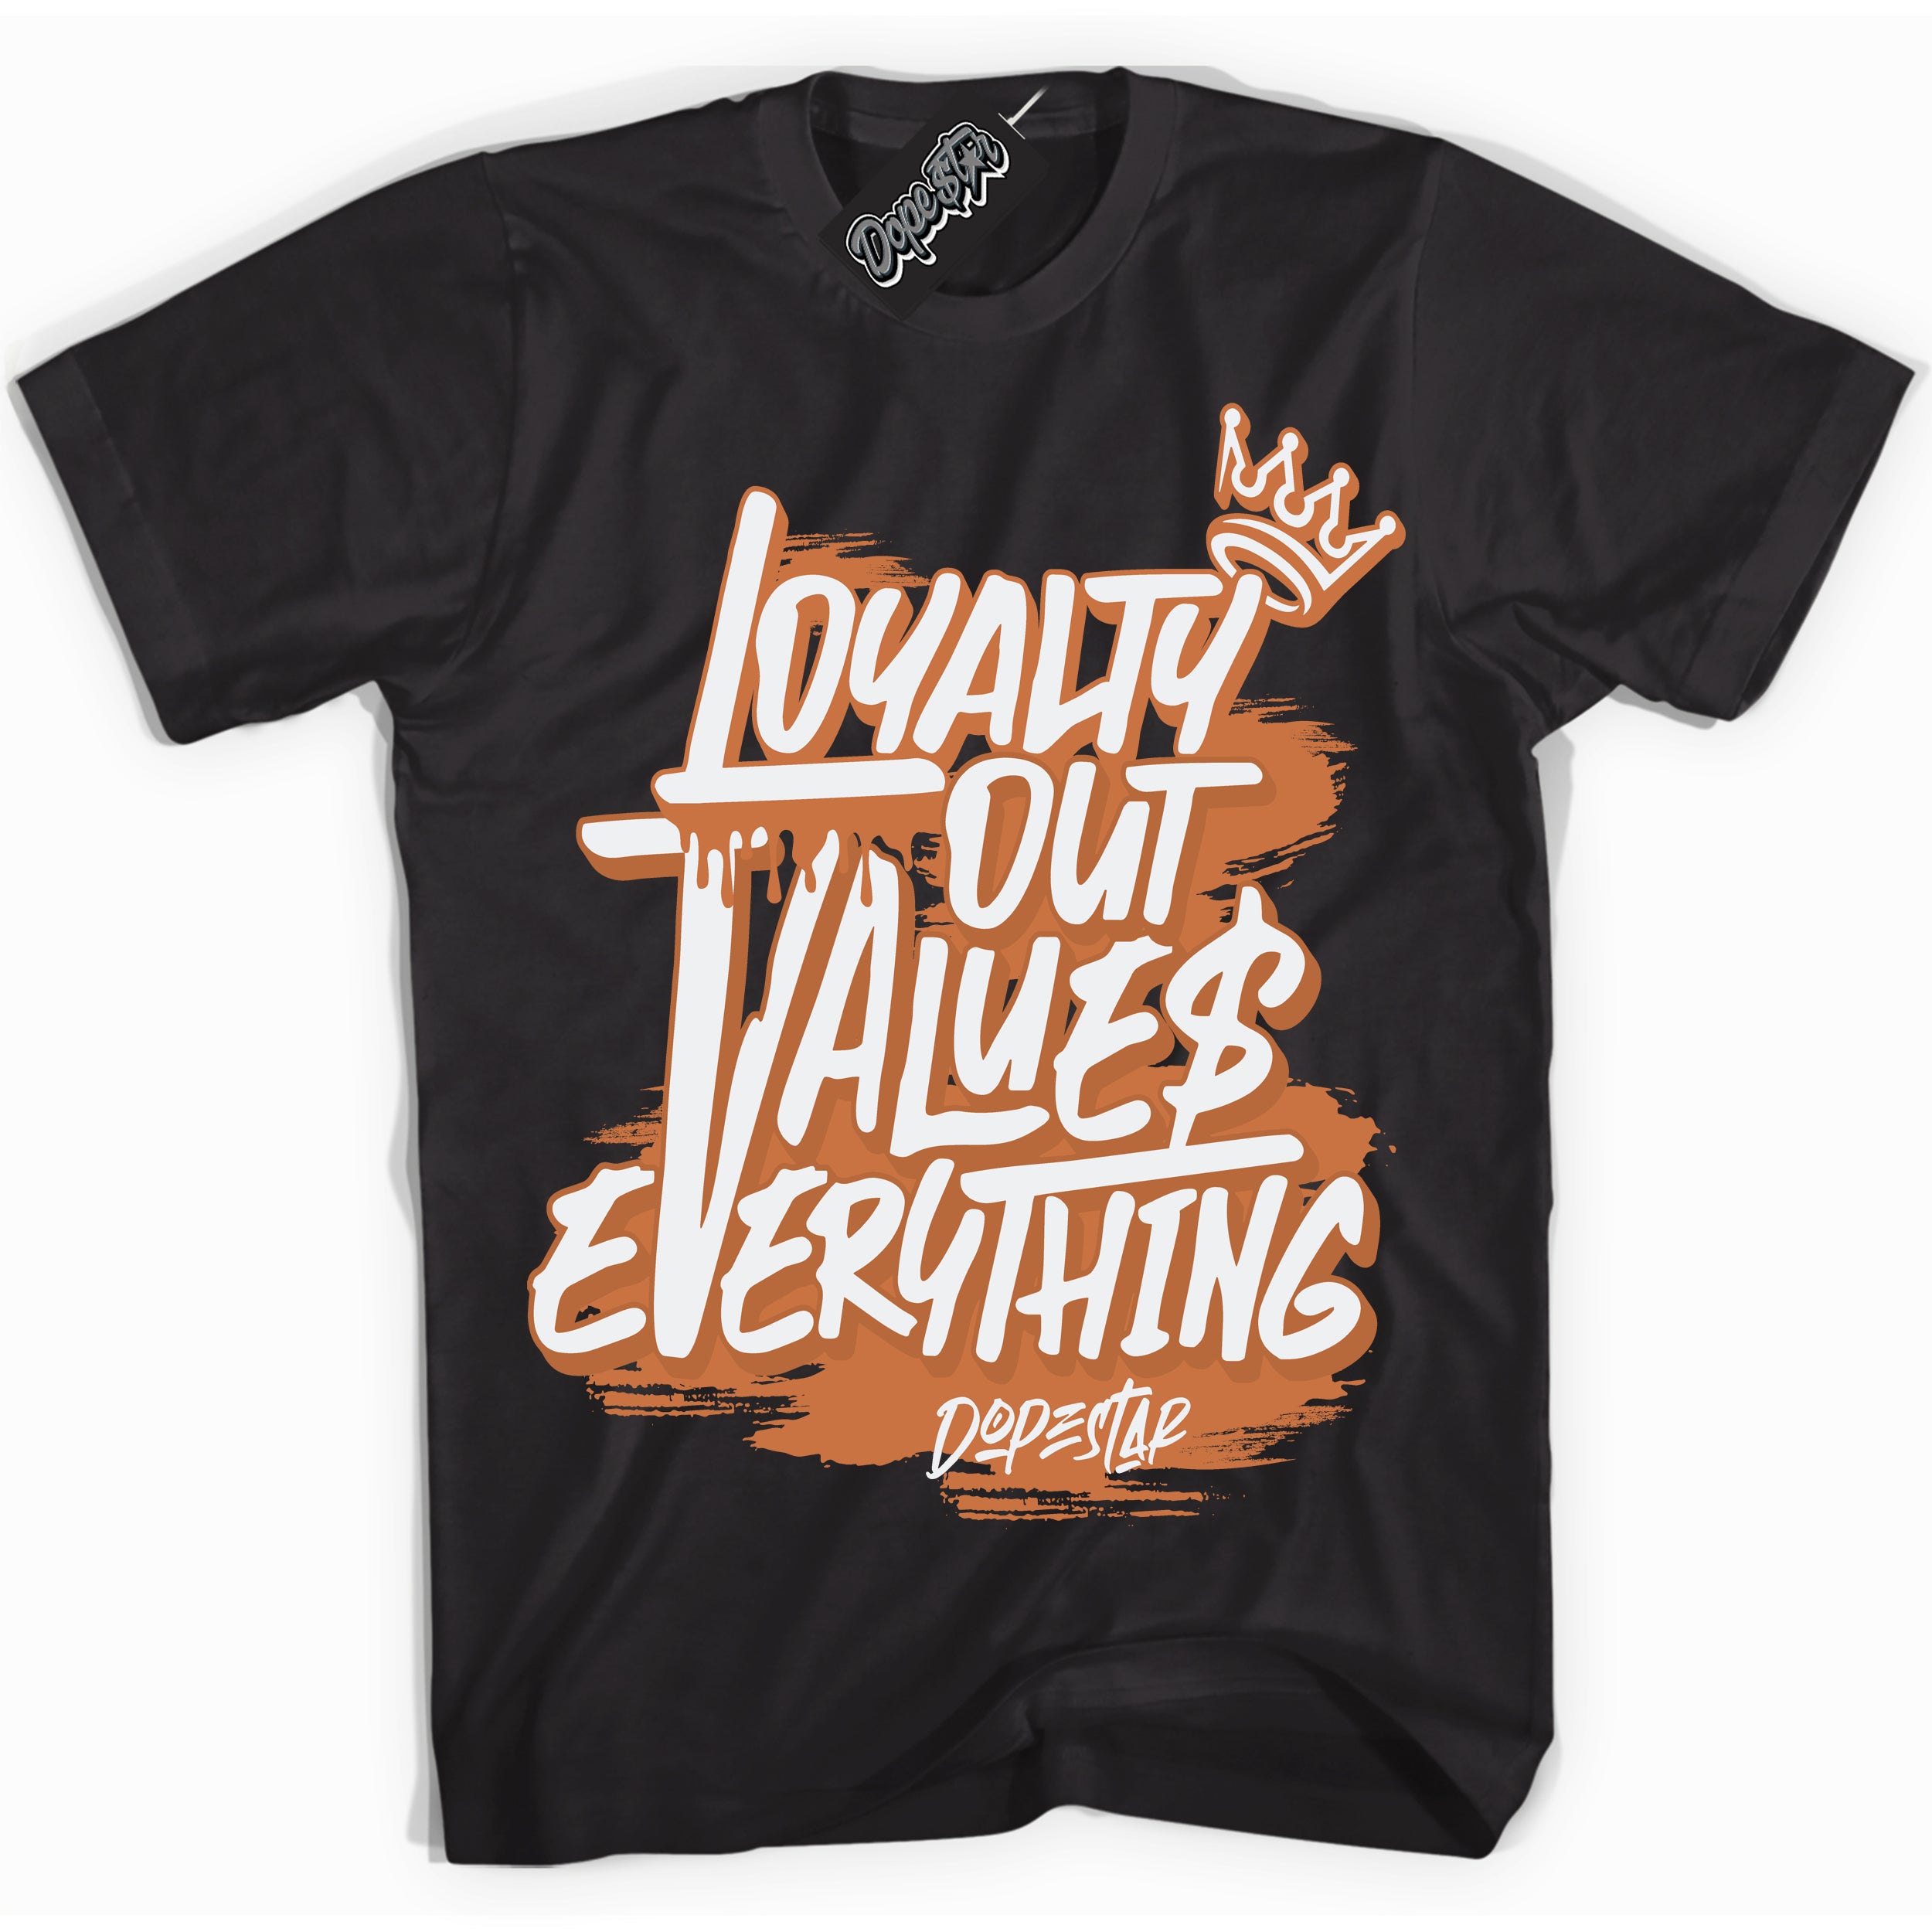 Cool Black Shirt with “ Loyalty Out Values Everything” design that perfectly matches Monarch Sneakers.